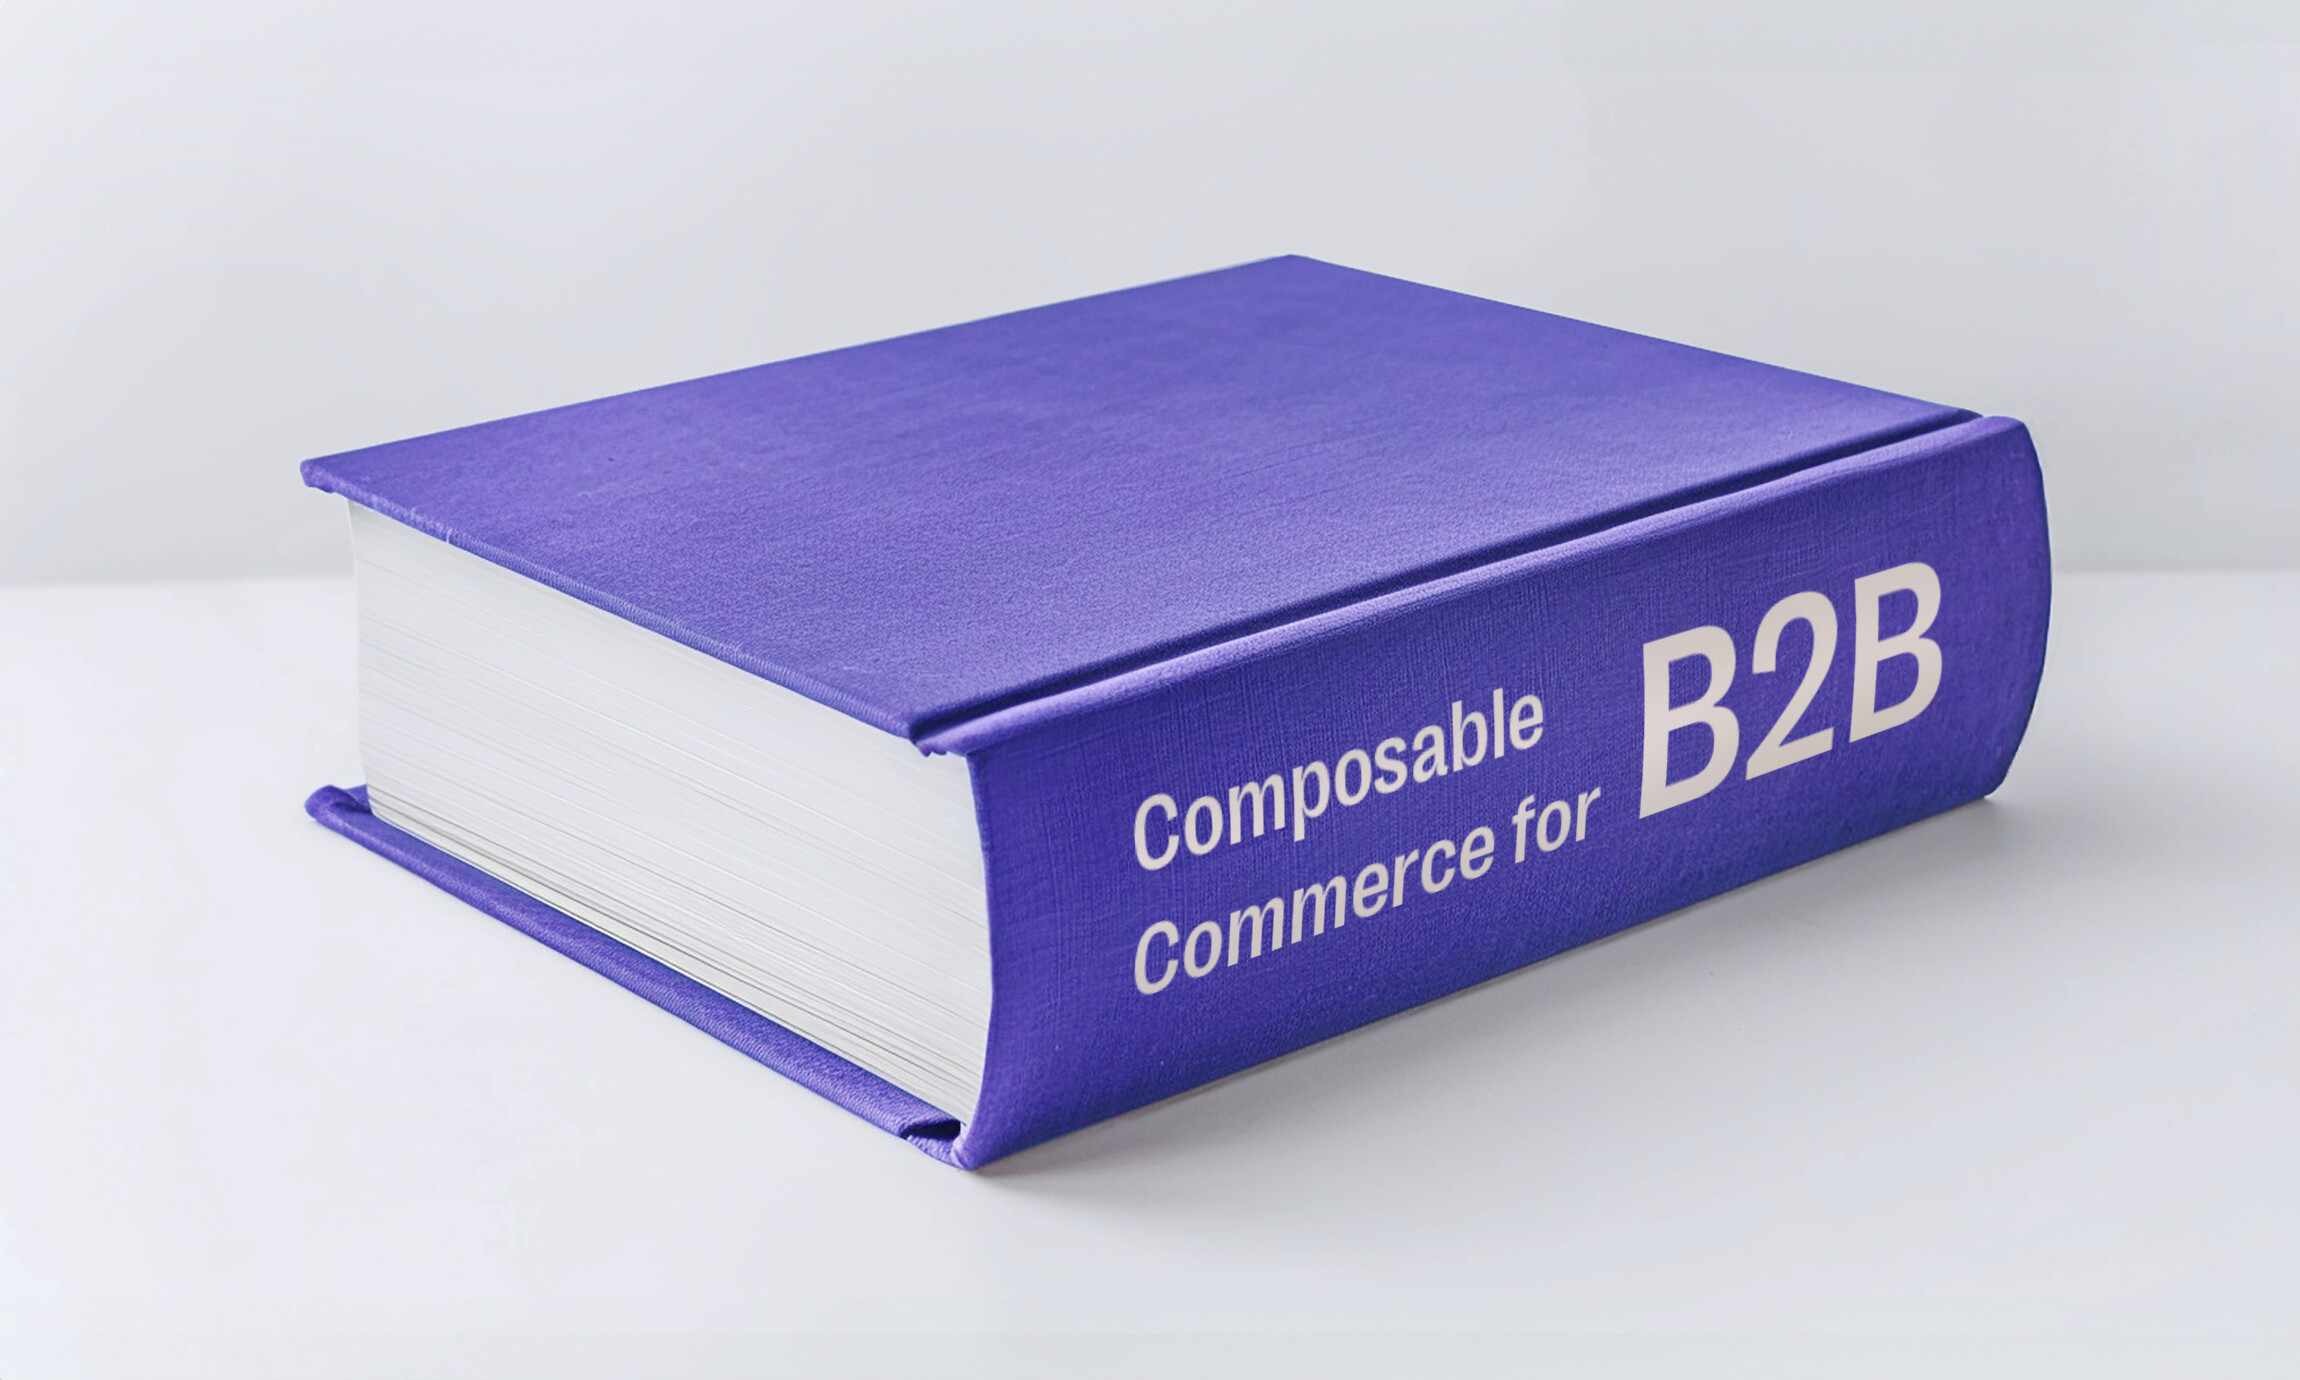 Composable commerce for B2B 101